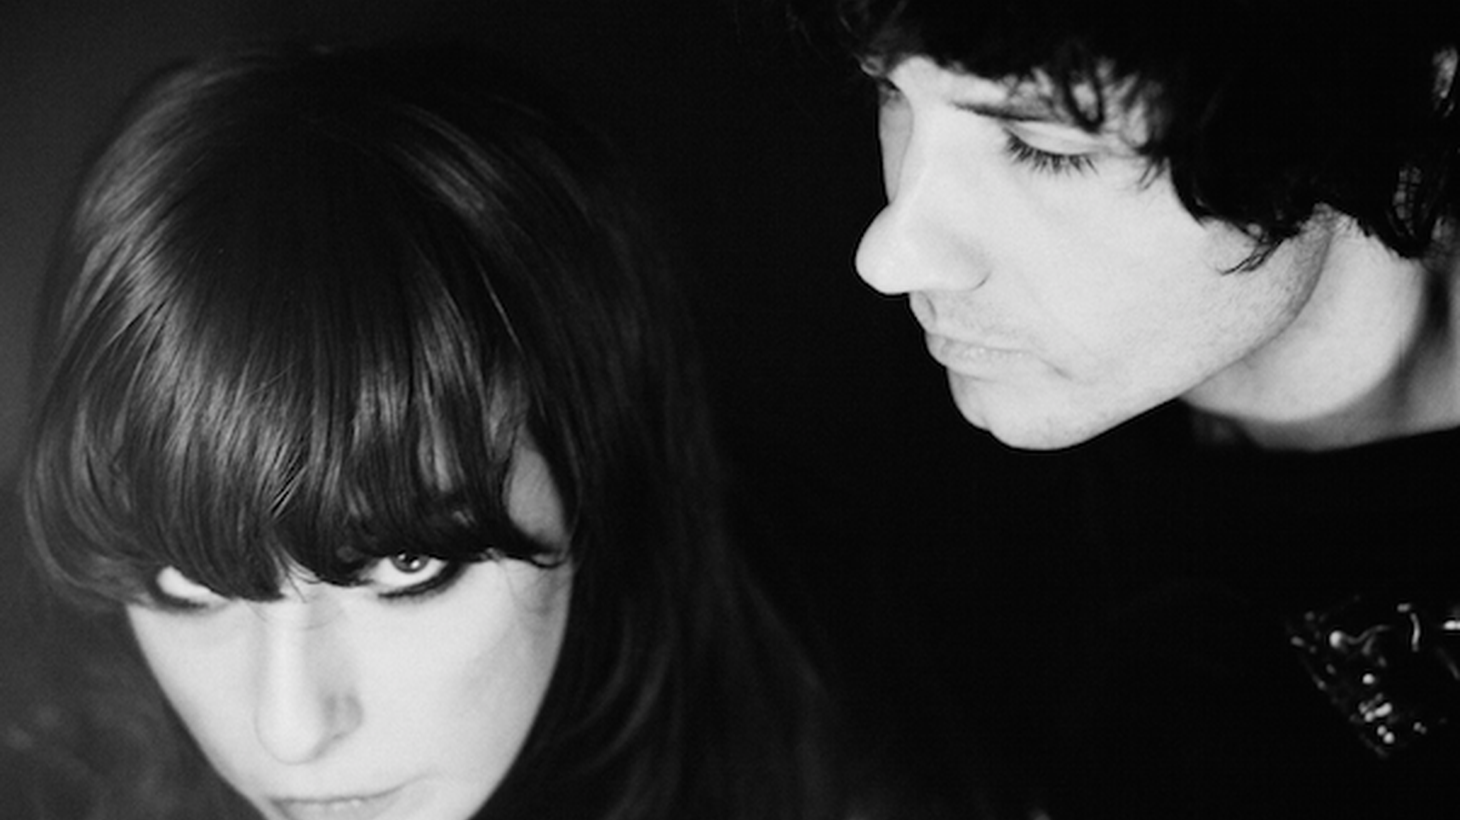 Baltimore-based band Beach House continues to create dark and dreamy pop music that is absolutely captivating. Their new album “7” is earning them some of the best reviews of their decade-plus career and we will host them live in studio.